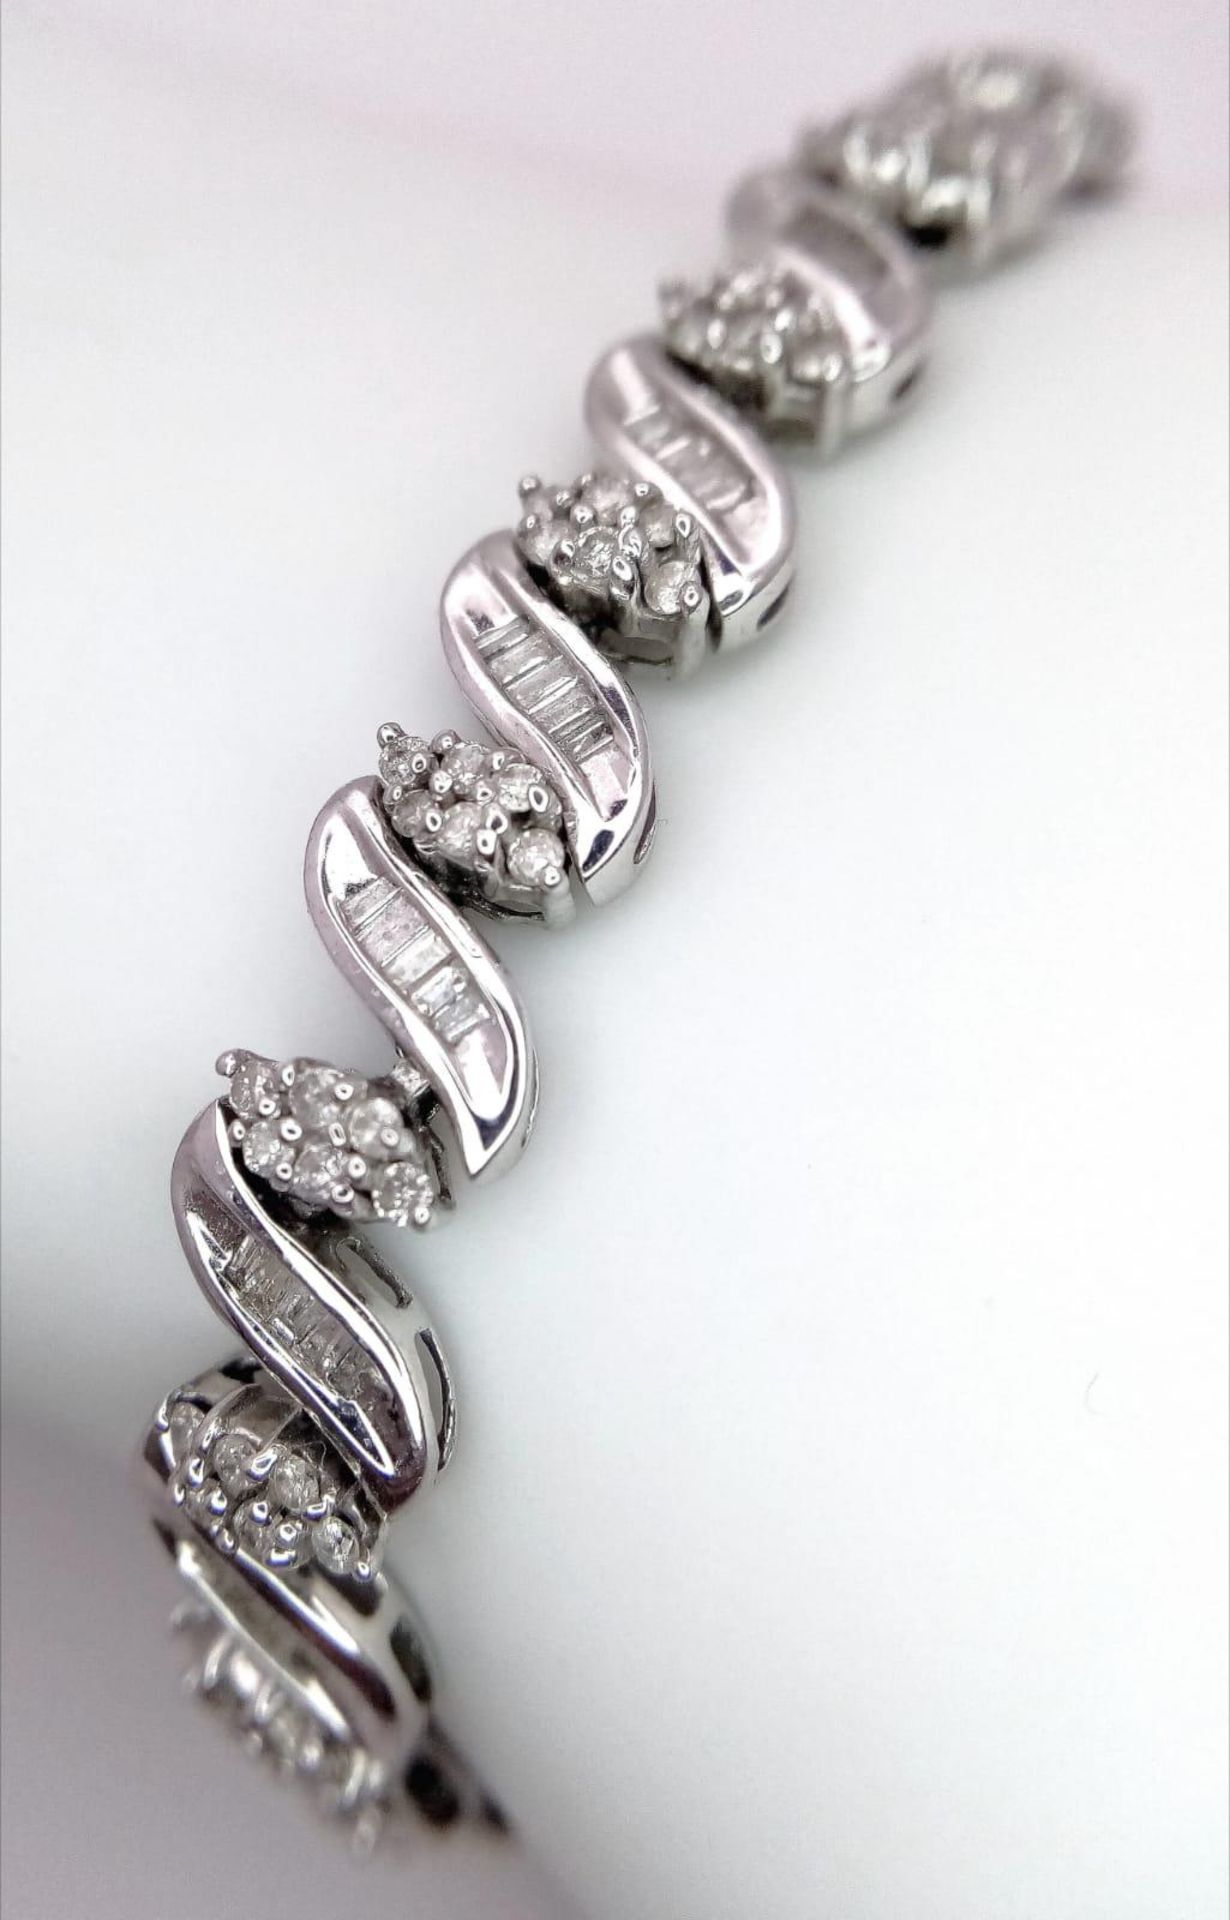 A 14K WHITE GOLD DIAMOND SWIRL BRACELET. A COMBINATION OF BAGUETTE AND ROUND CUT DIAMONDS 2.30CT